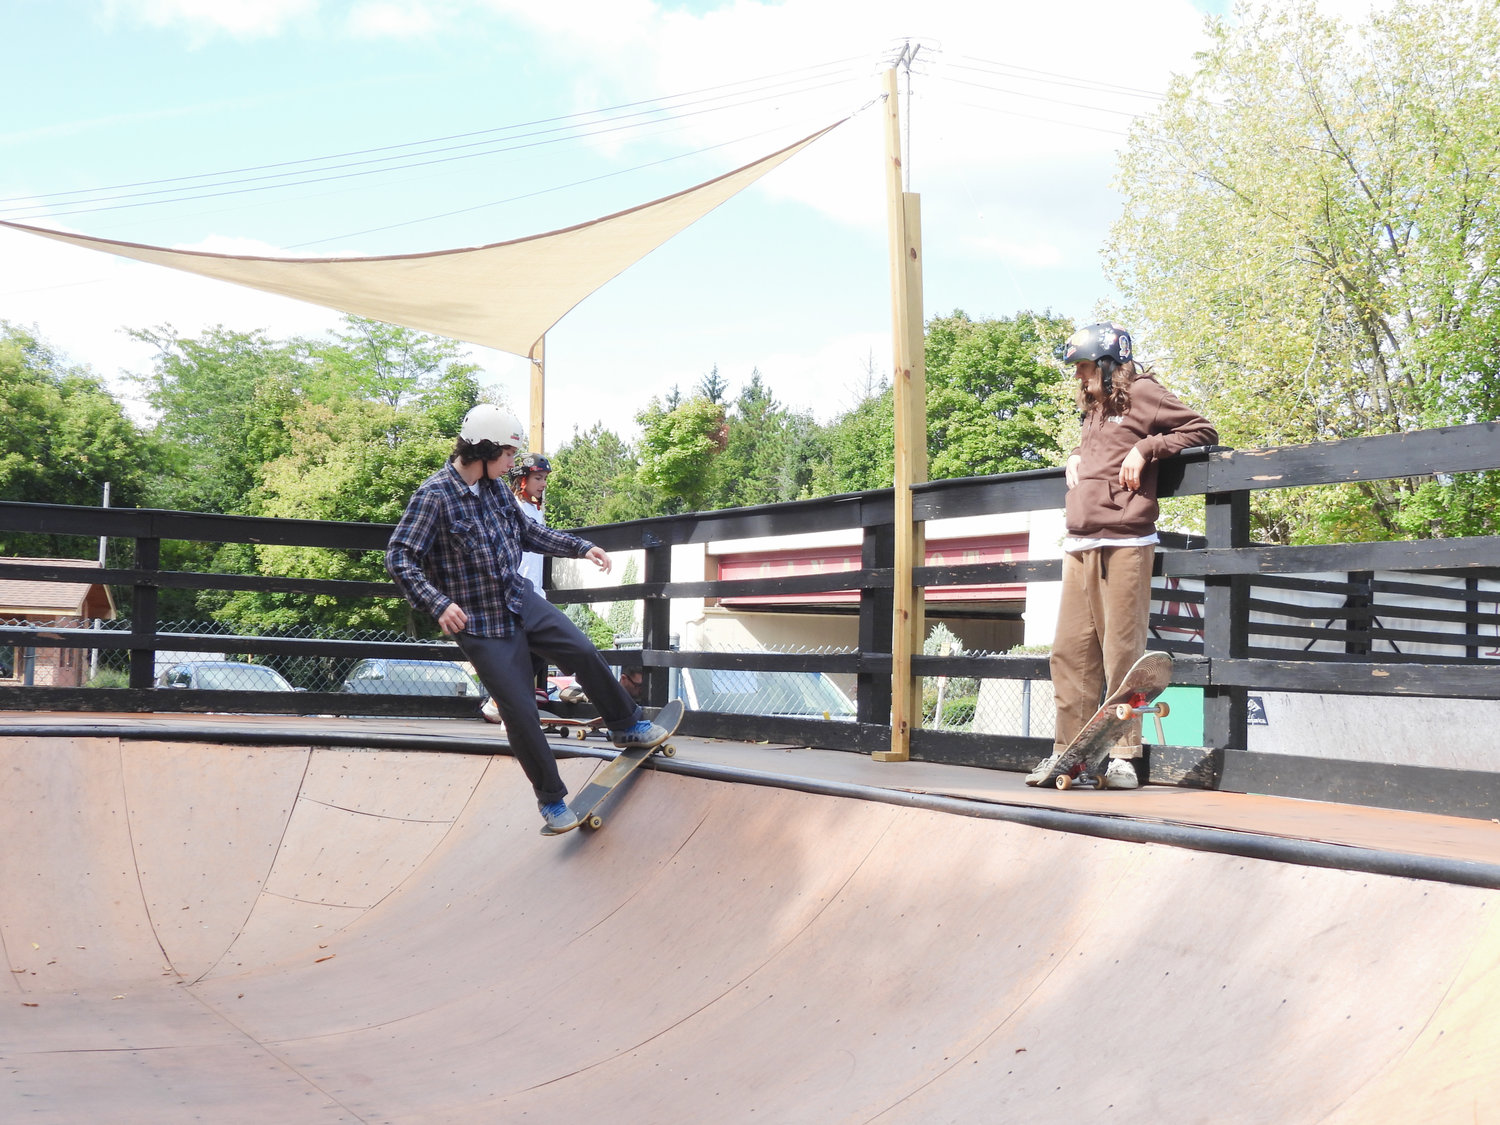 Skaters enjoy a relaxing afternoon at the Lenox Skate Park on Saturday, Sept. 24